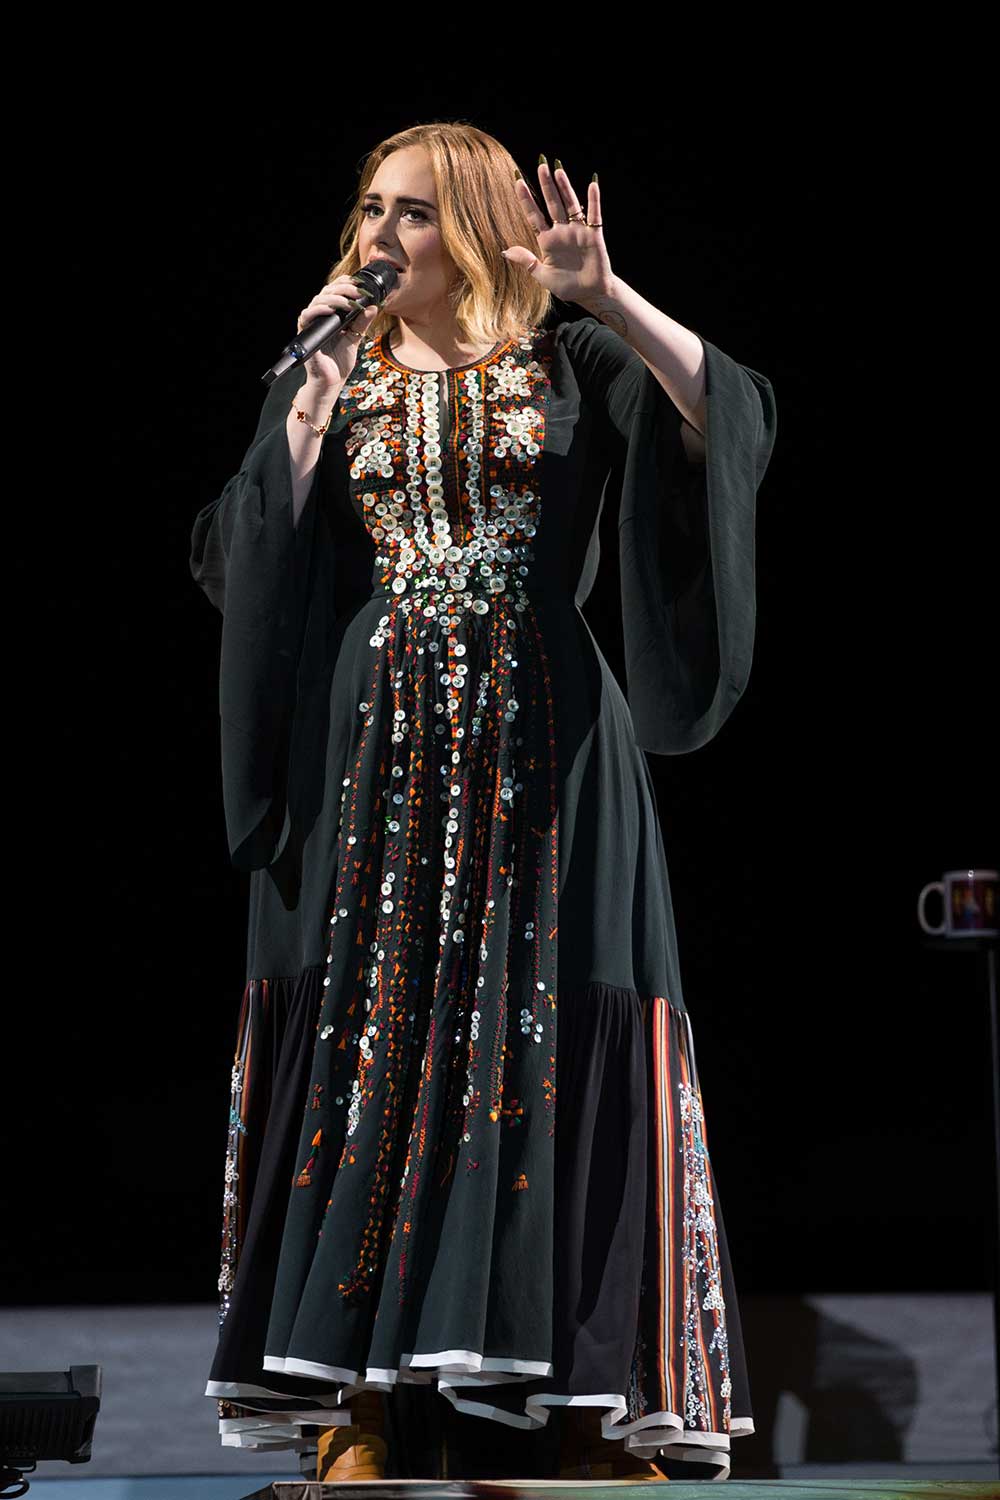 Adele, in a custom Chloe dress that took over 200 hours to make, performs at Glastonbury.